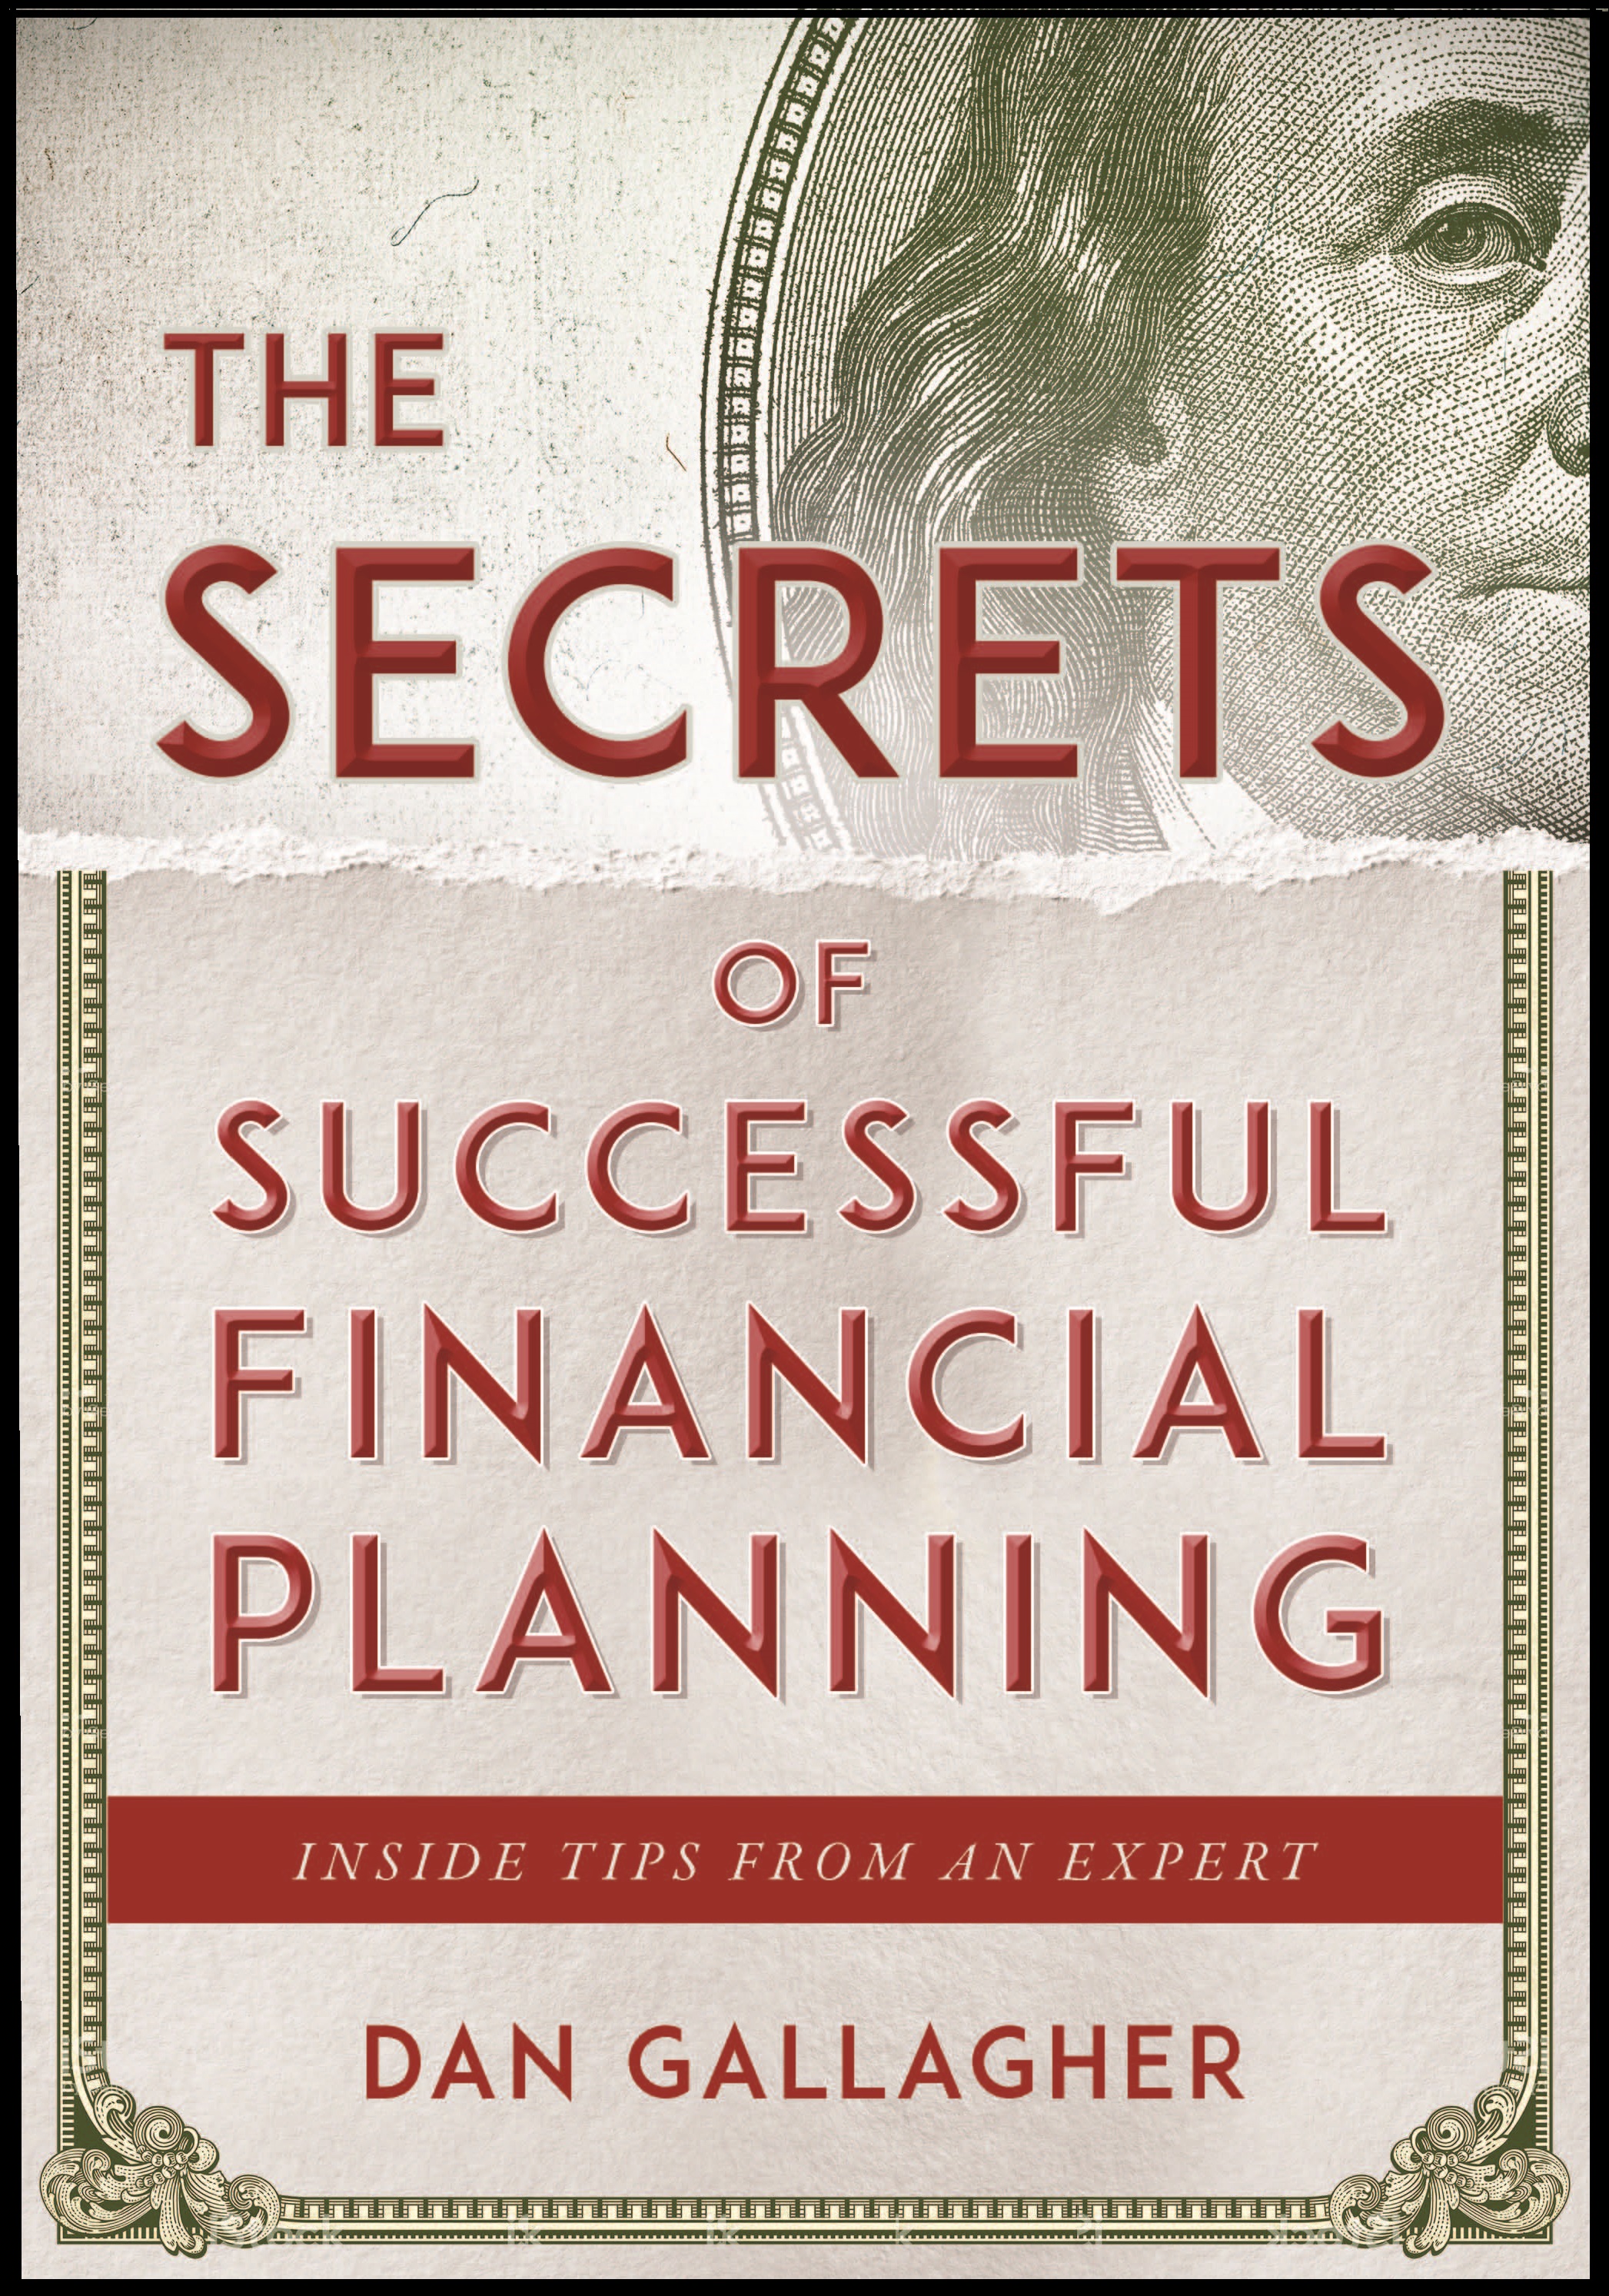 Dan Gallagher's latest book, The Secrets of Successfull Financial Planning